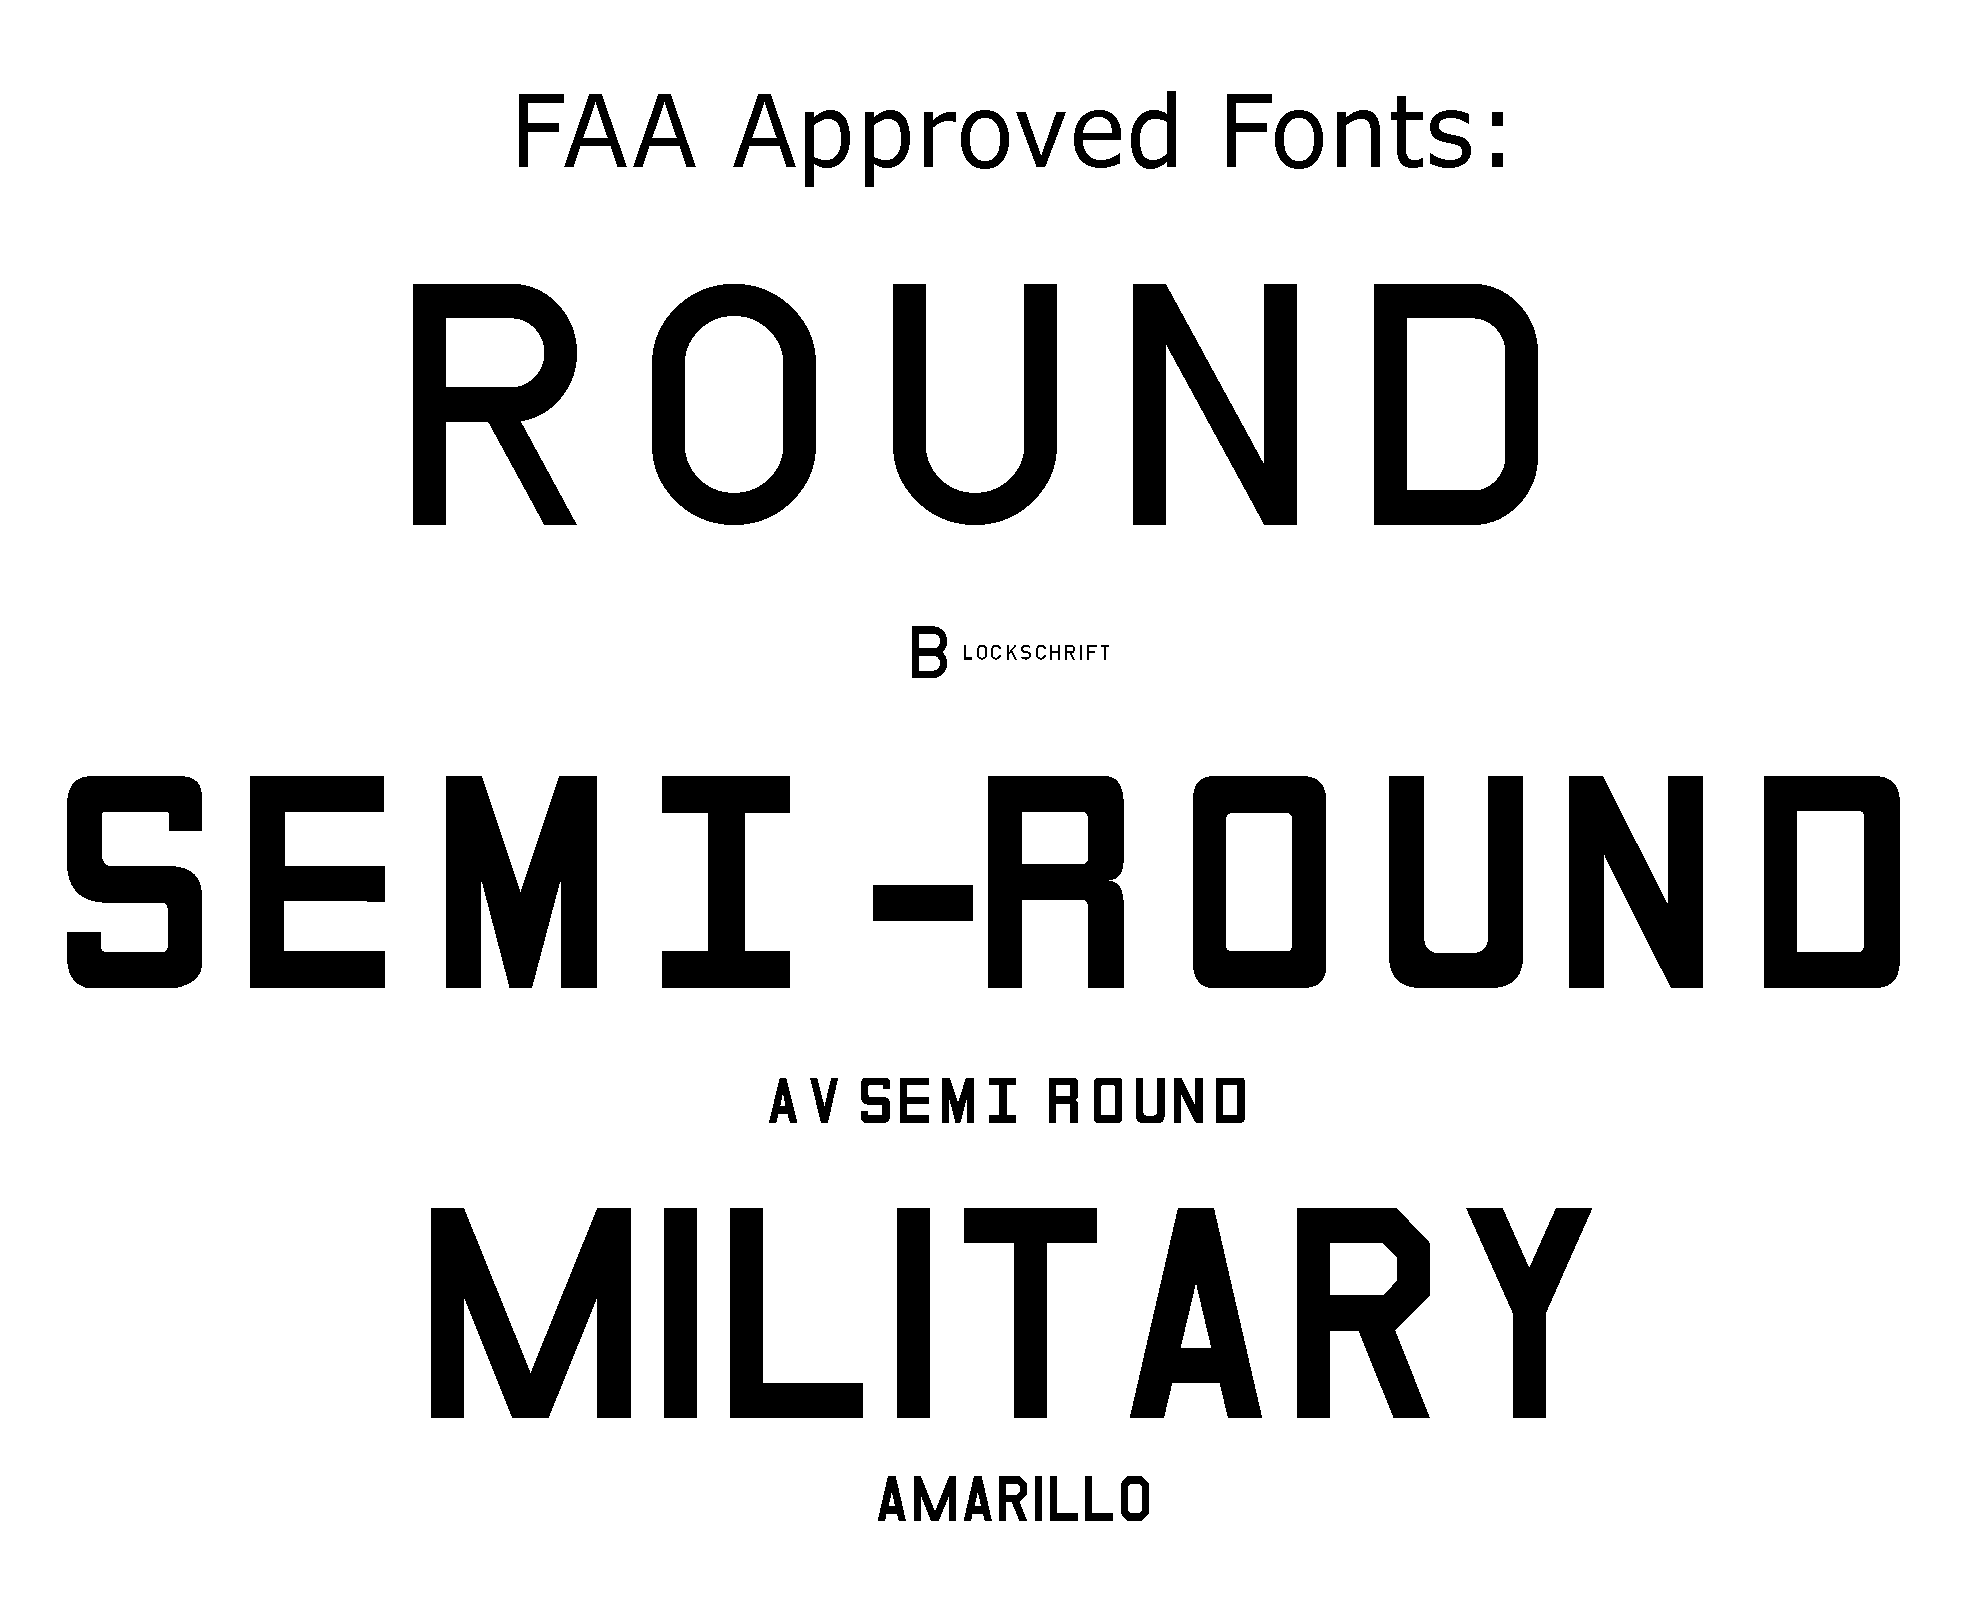 faa aircraft approved fonts